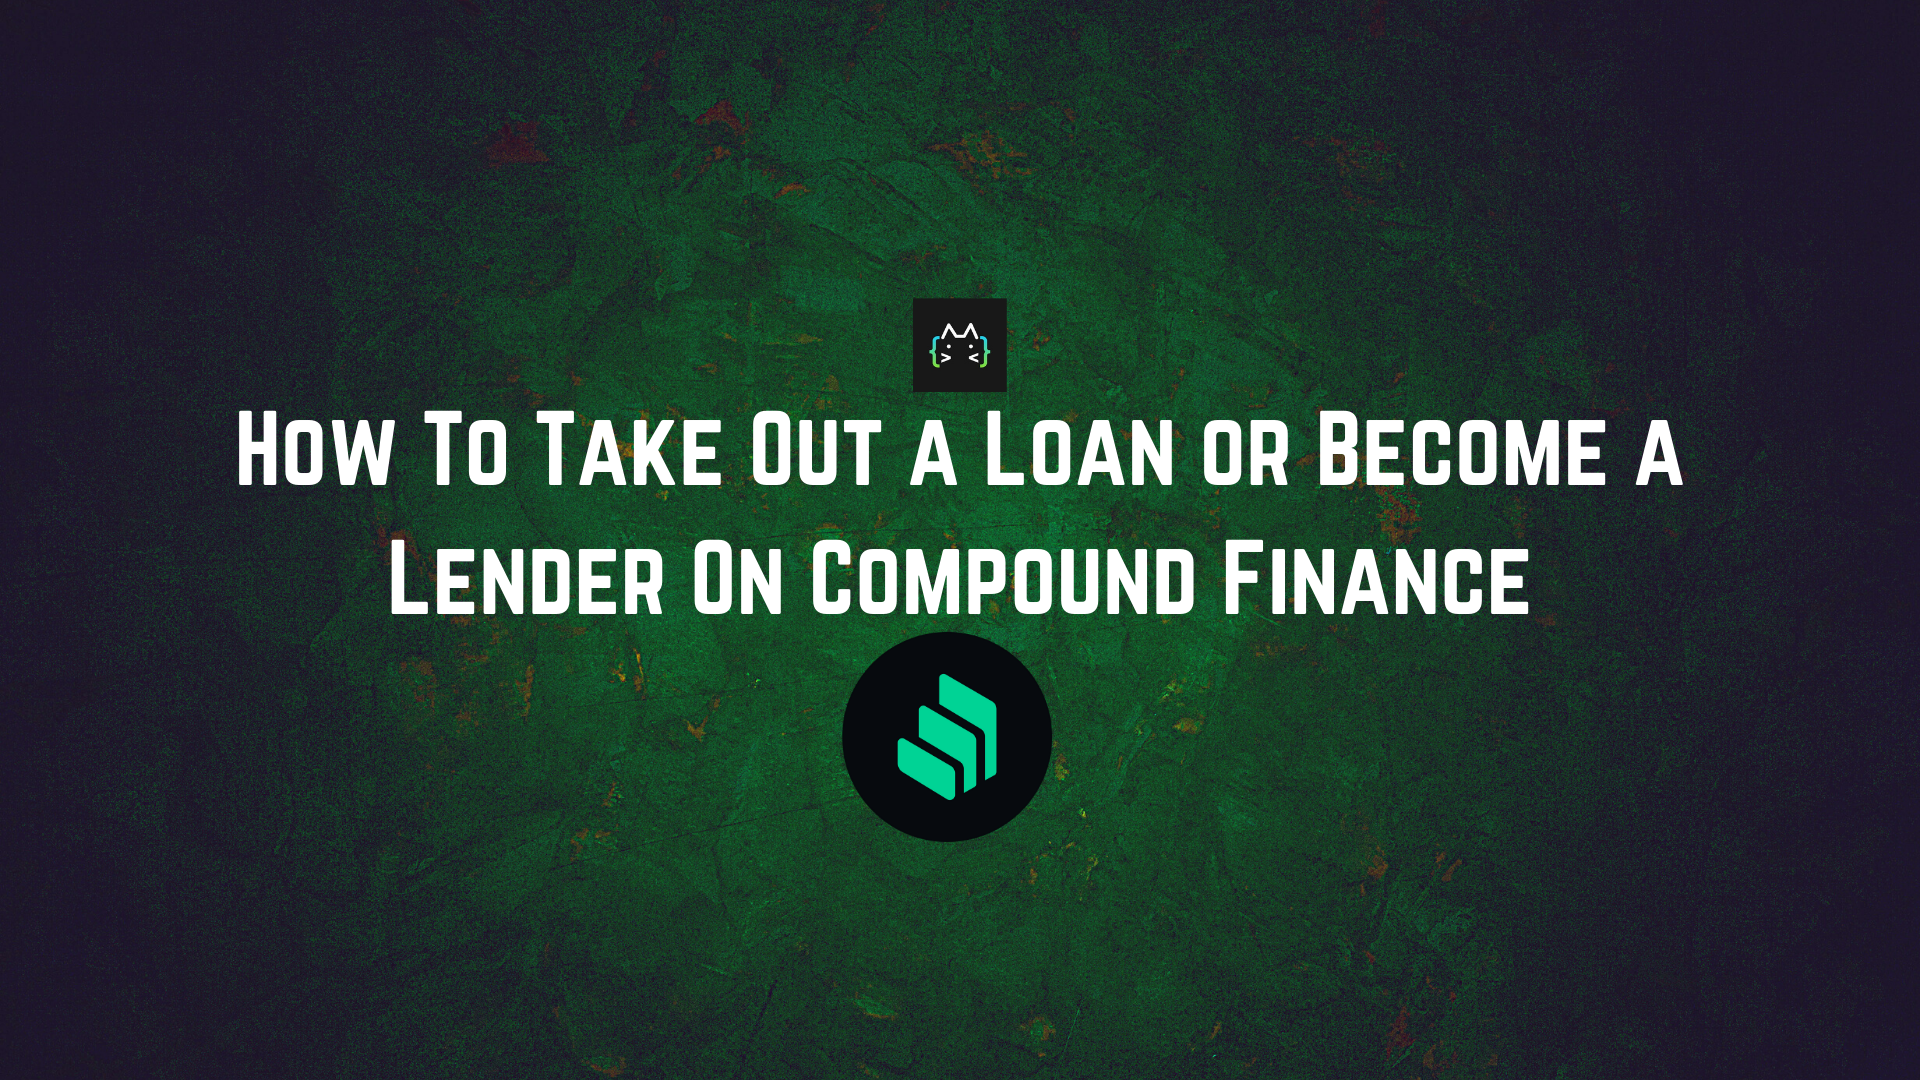 How To Take Out a Loan or Become a Lender On Compound Finance